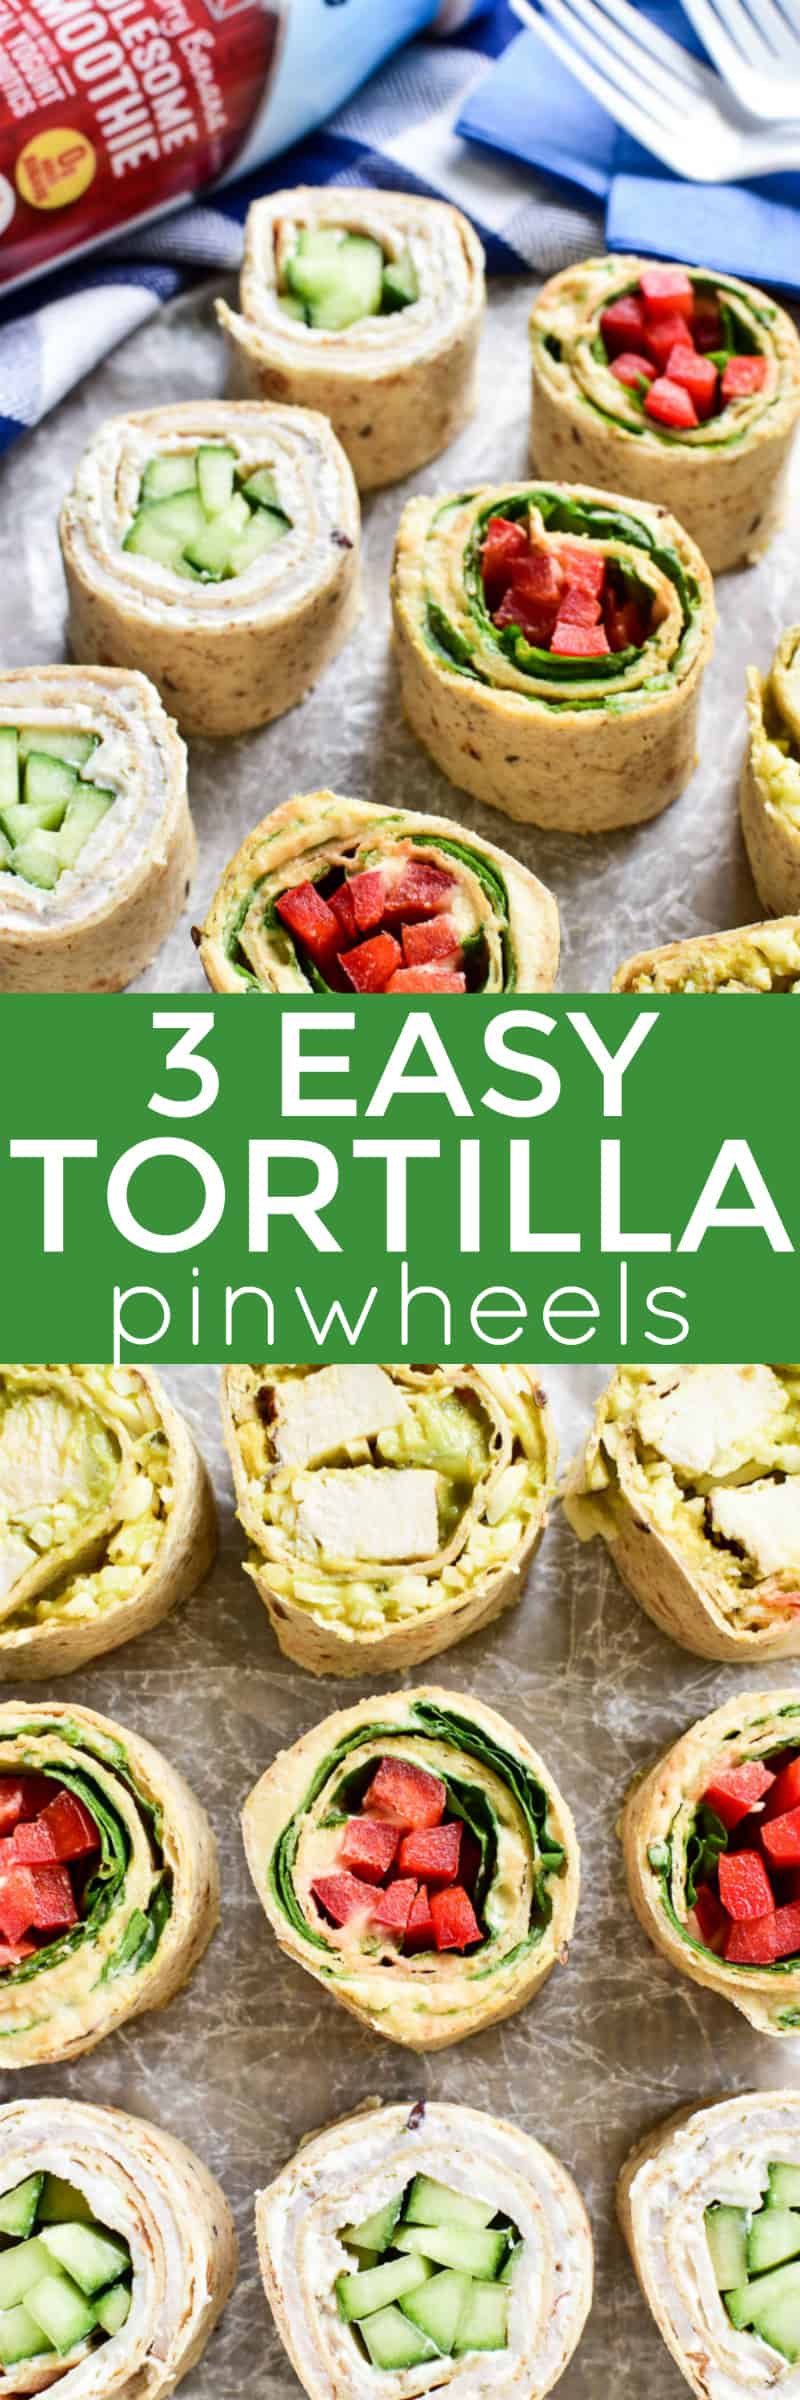 Tortilla Pinwheels make the perfect snack for busy summer days! They're healthy, satisfying, and can easily be made with any of your favorite ingredients. These 3 easy pinwheel recipes are each made with just four ingredients, and they come together in no time at all. Just fill them, roll them, slice them, and they're ready to enjoy. And....they pair perfectly with Live Real Farms Wholesome Smoothies for an easy snack or lunch on the go! #sponsored 